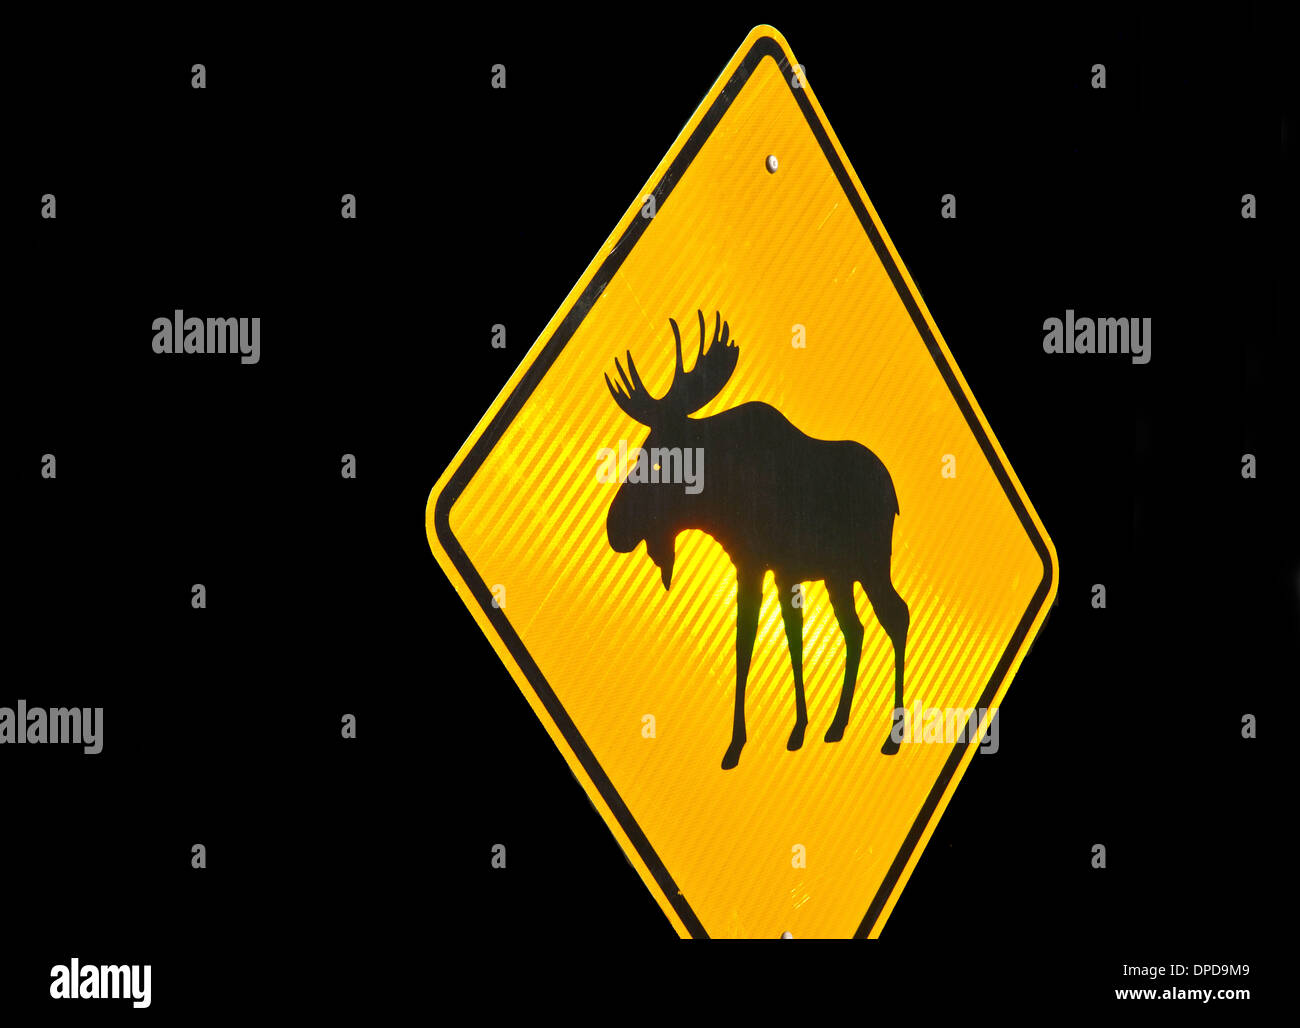 Moose Crossing Road Sign Banque D'Images